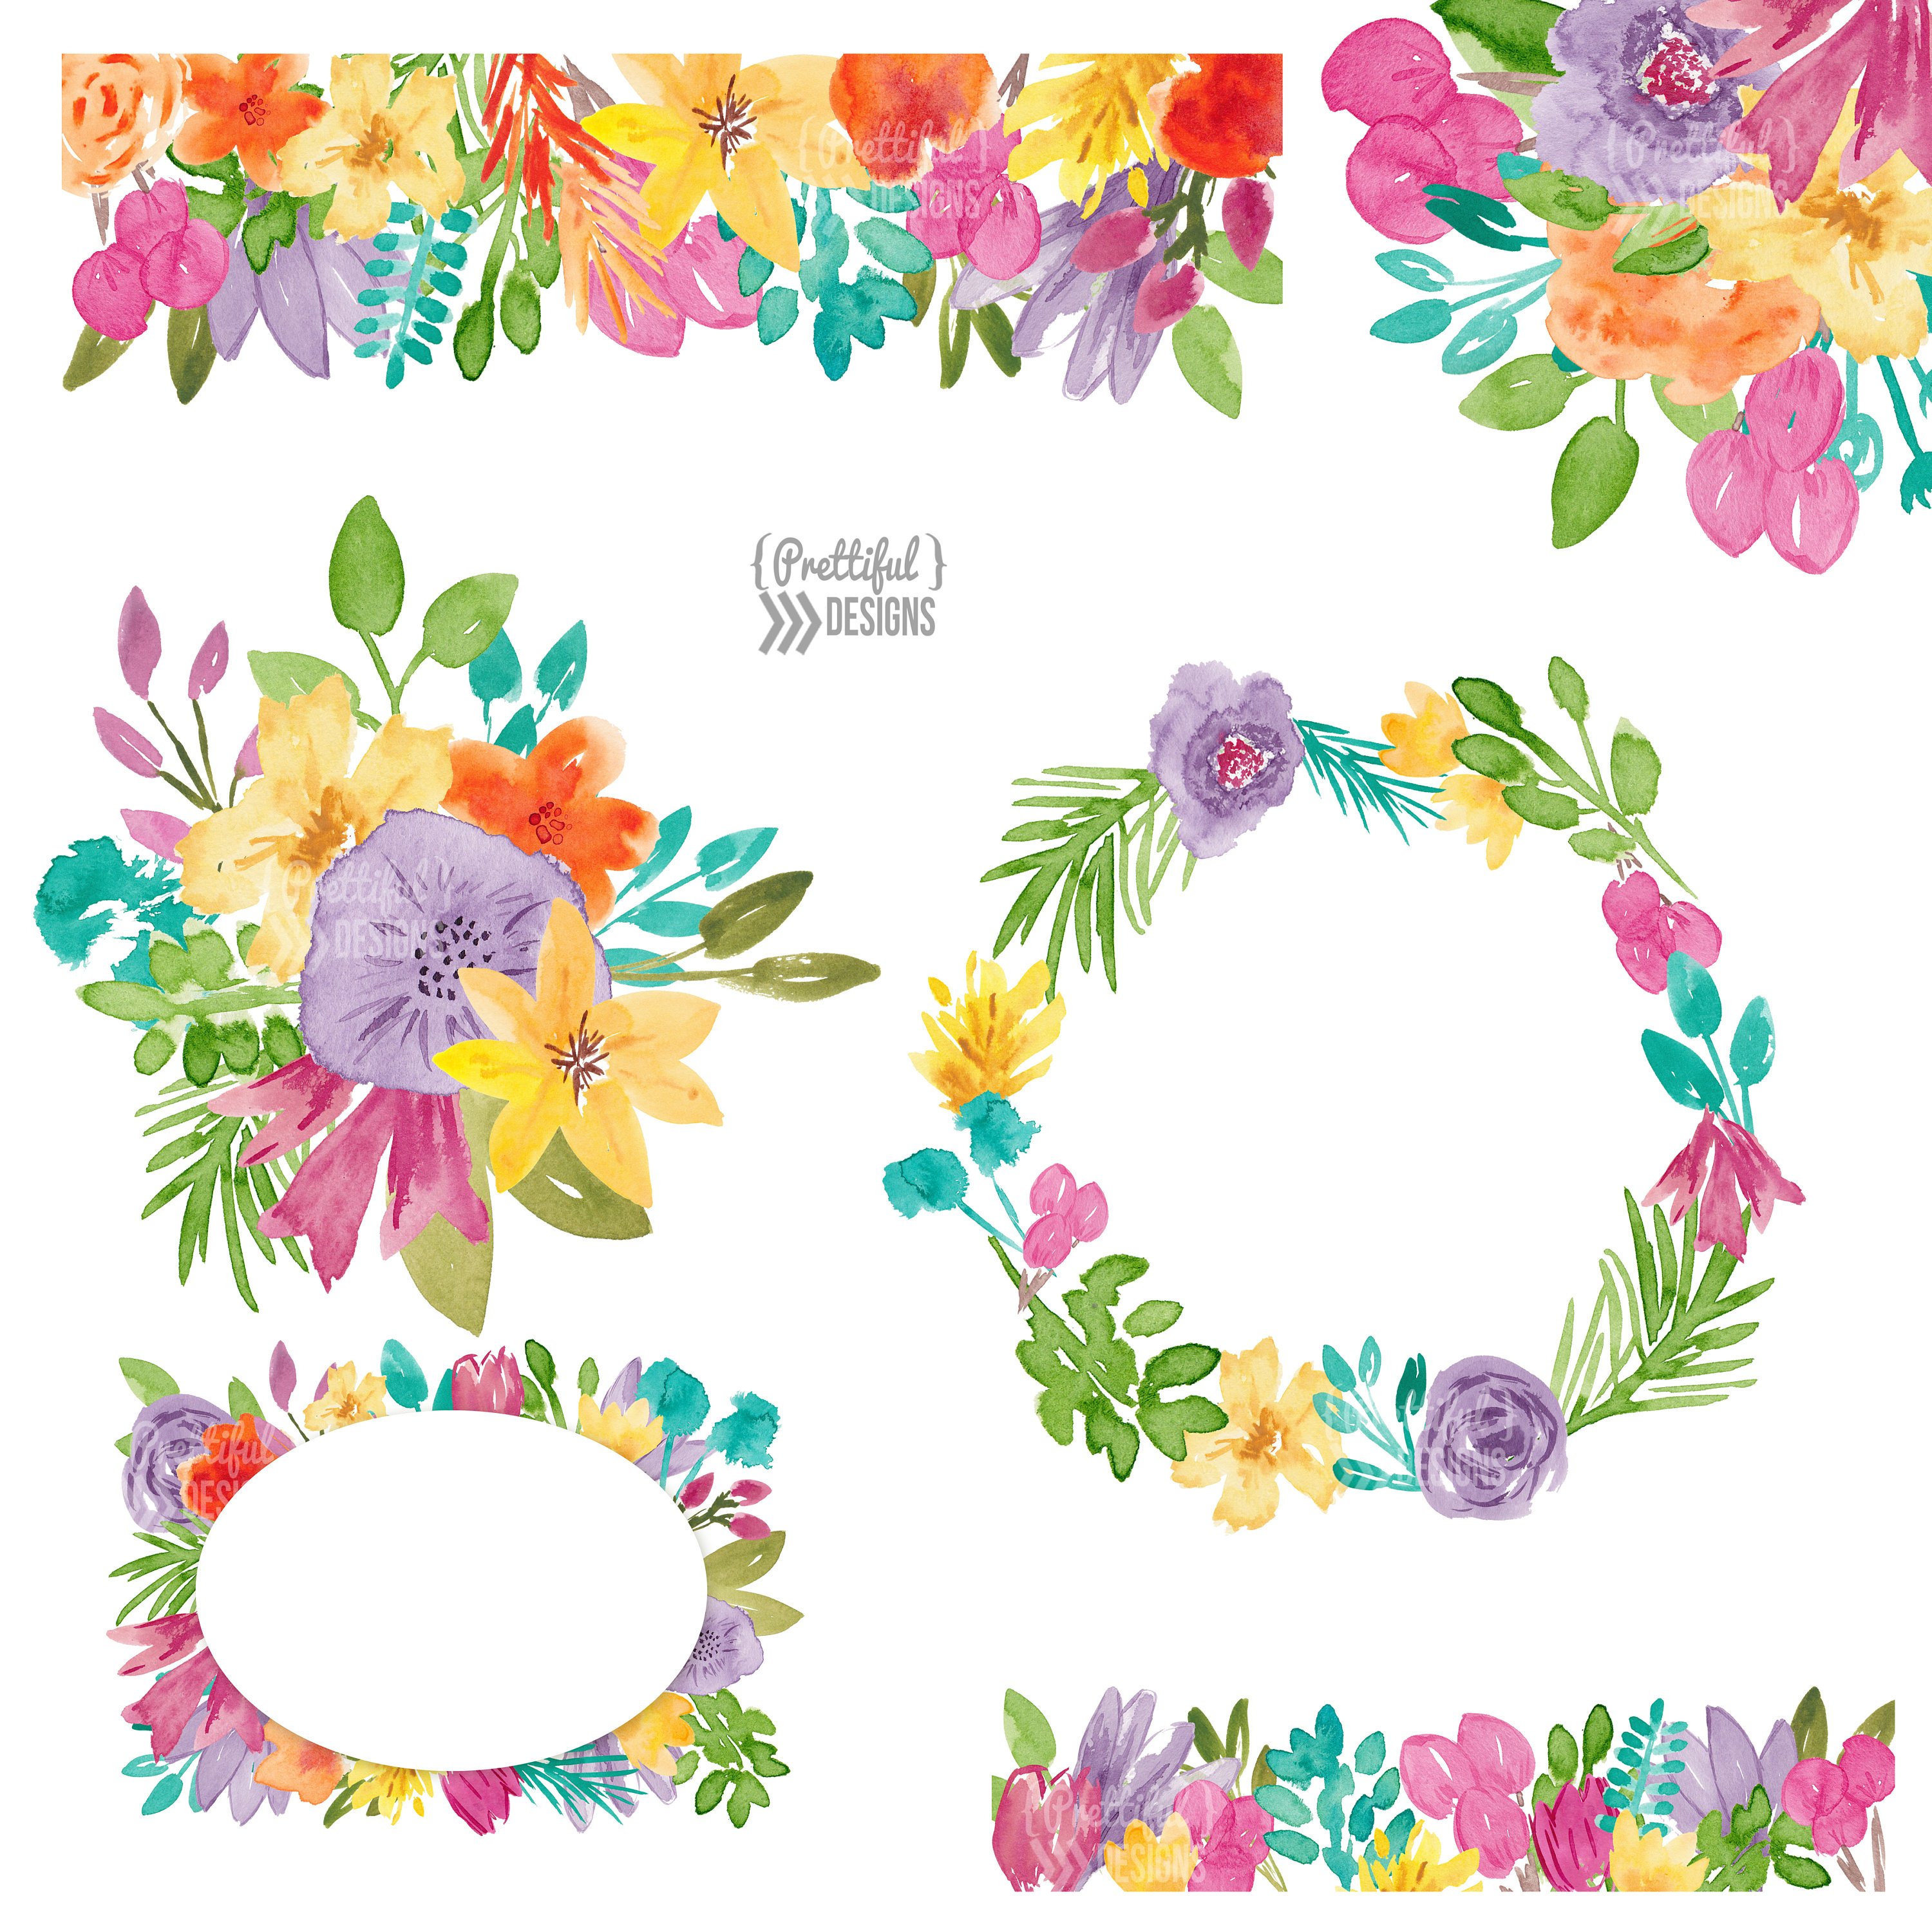 Watercolor Floral Clipart Free at PaintingValley.com.